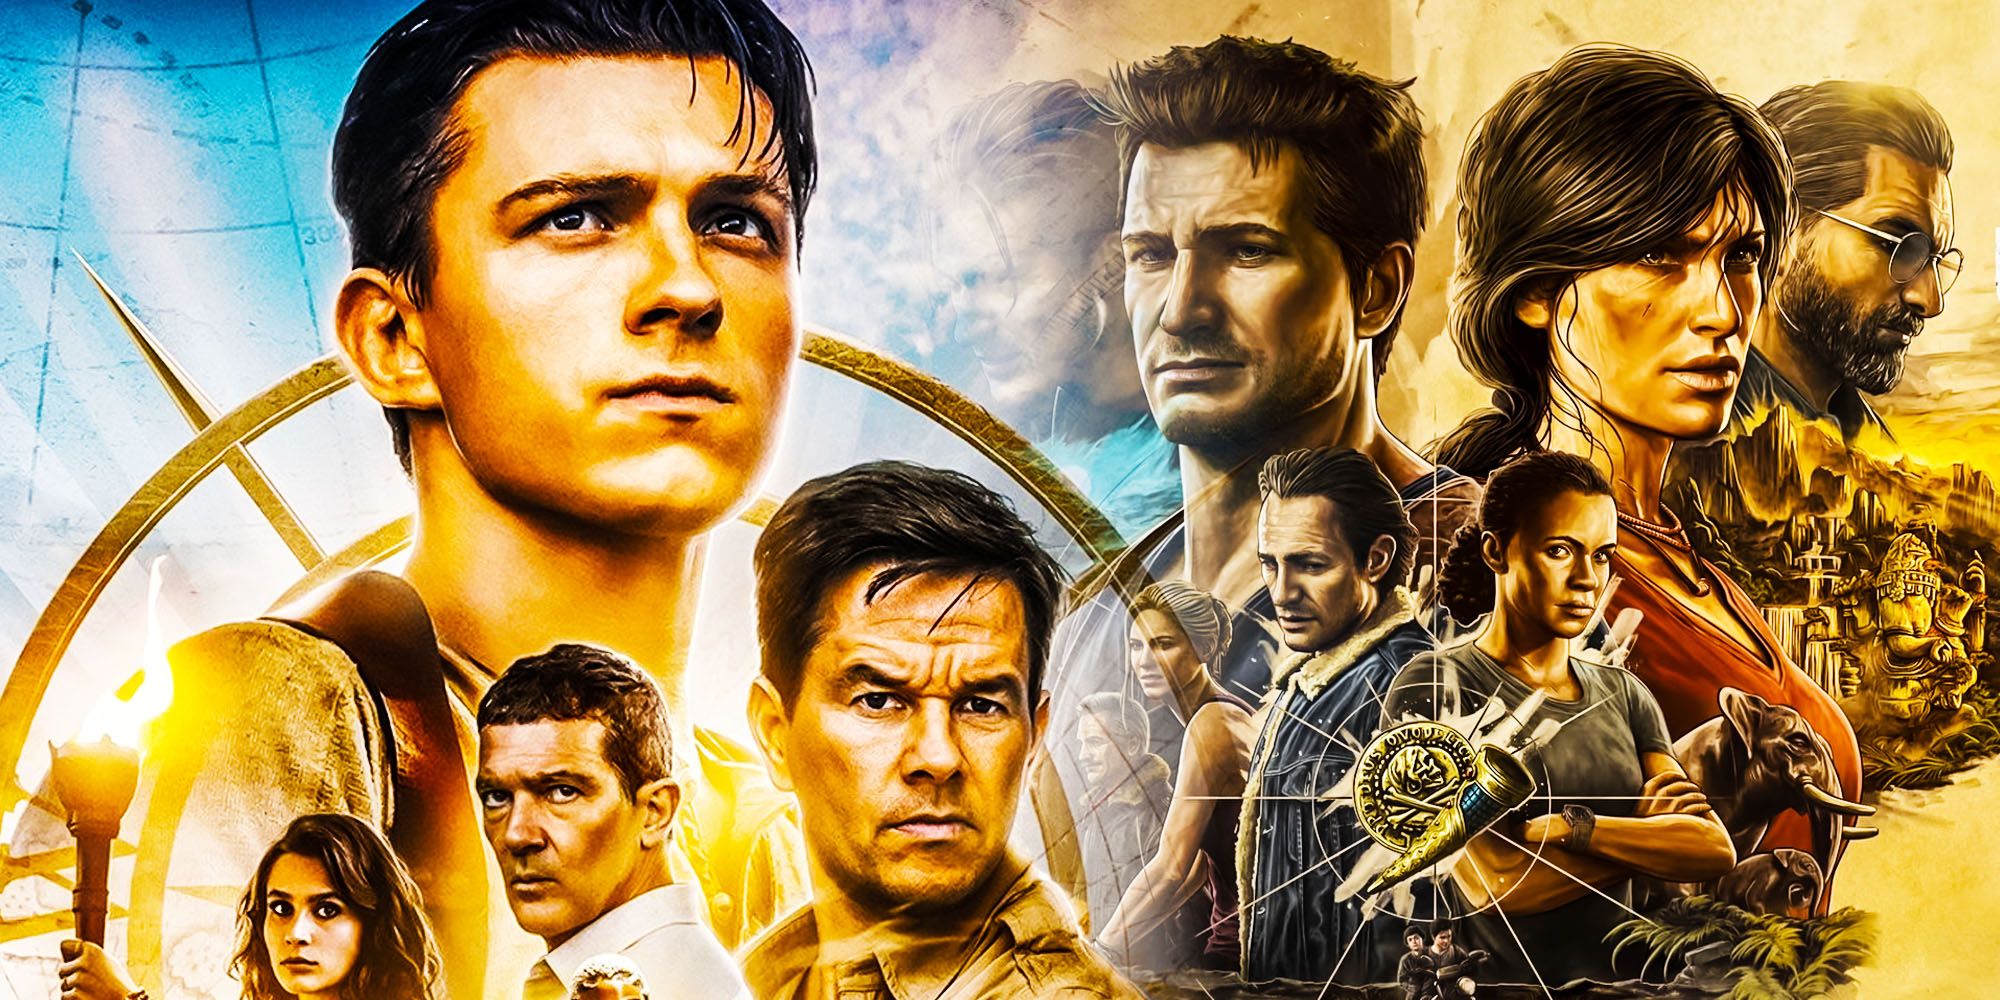 Uncharted film review: This is how you don't adapt a video game